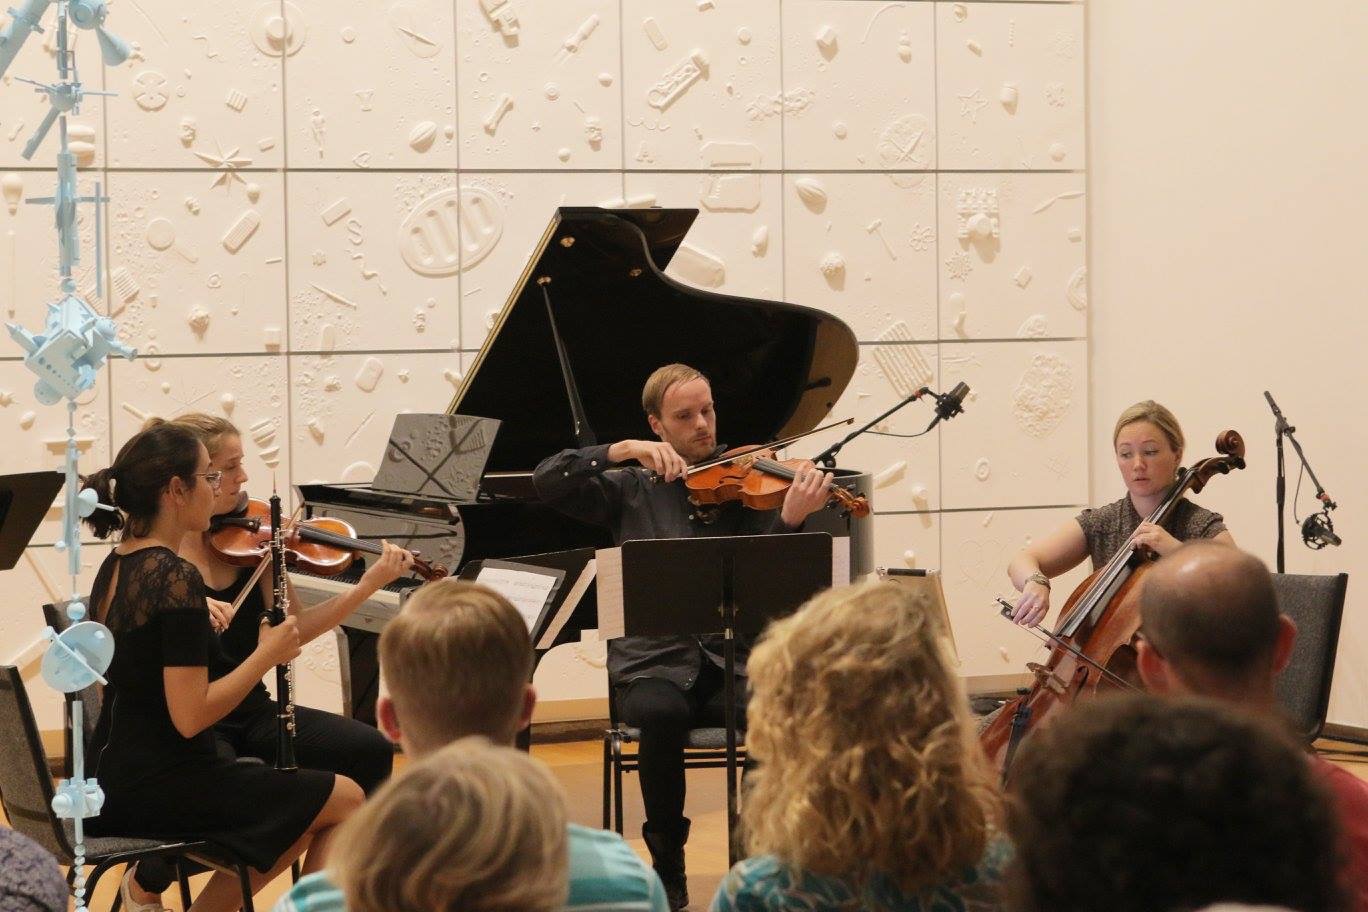 Performing Martin Bresnick's Going Home alongside Bang on a Can All-Star cellist Ashley Bathgate (who will be featured in a September 2017 Dots+Loops show in Brisbane). Image courtesy of Massachusetts Museum of Contemporary Art.